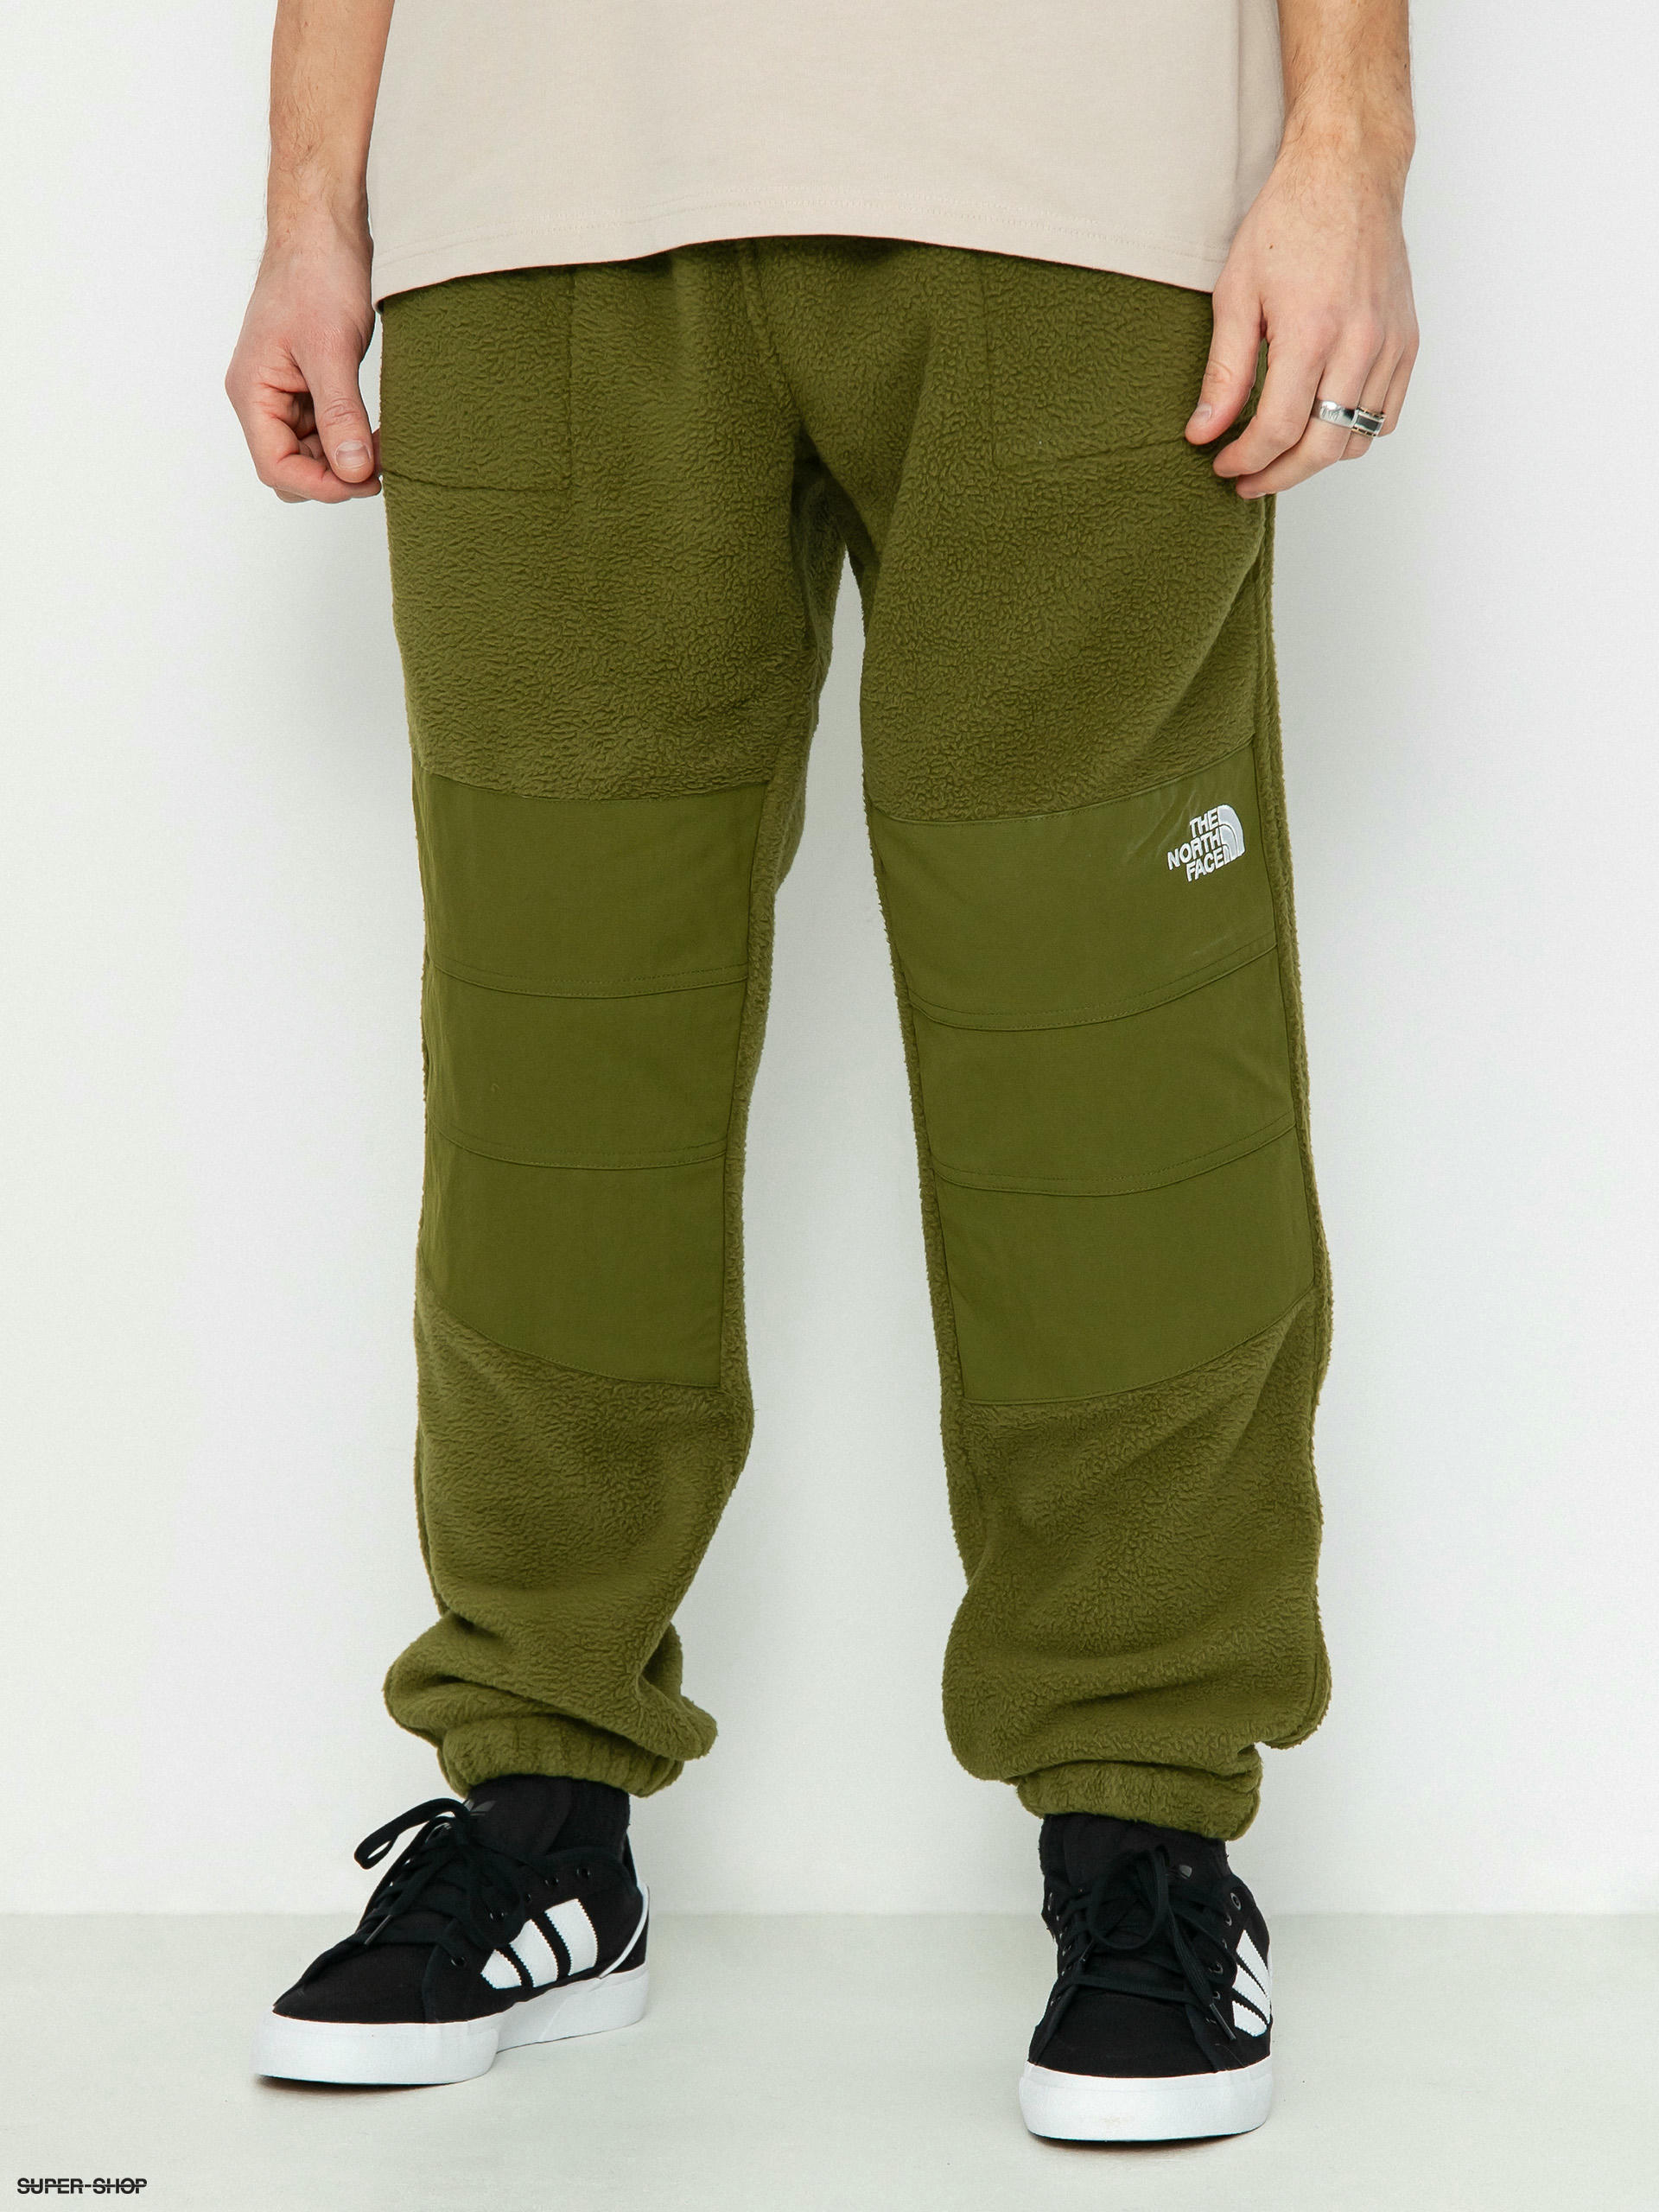 The North Face x Undercover Soukuu Fleece Track Pants - Farfetch